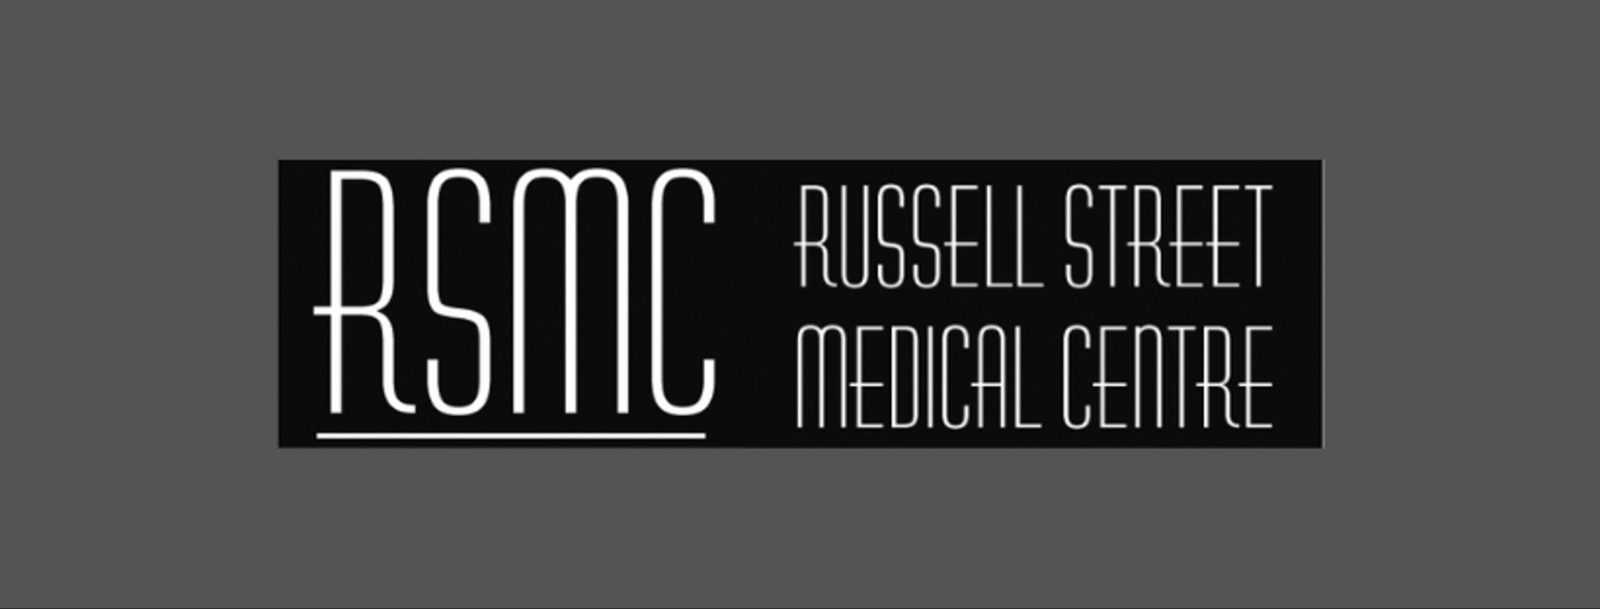 Russell Street Medical Centre